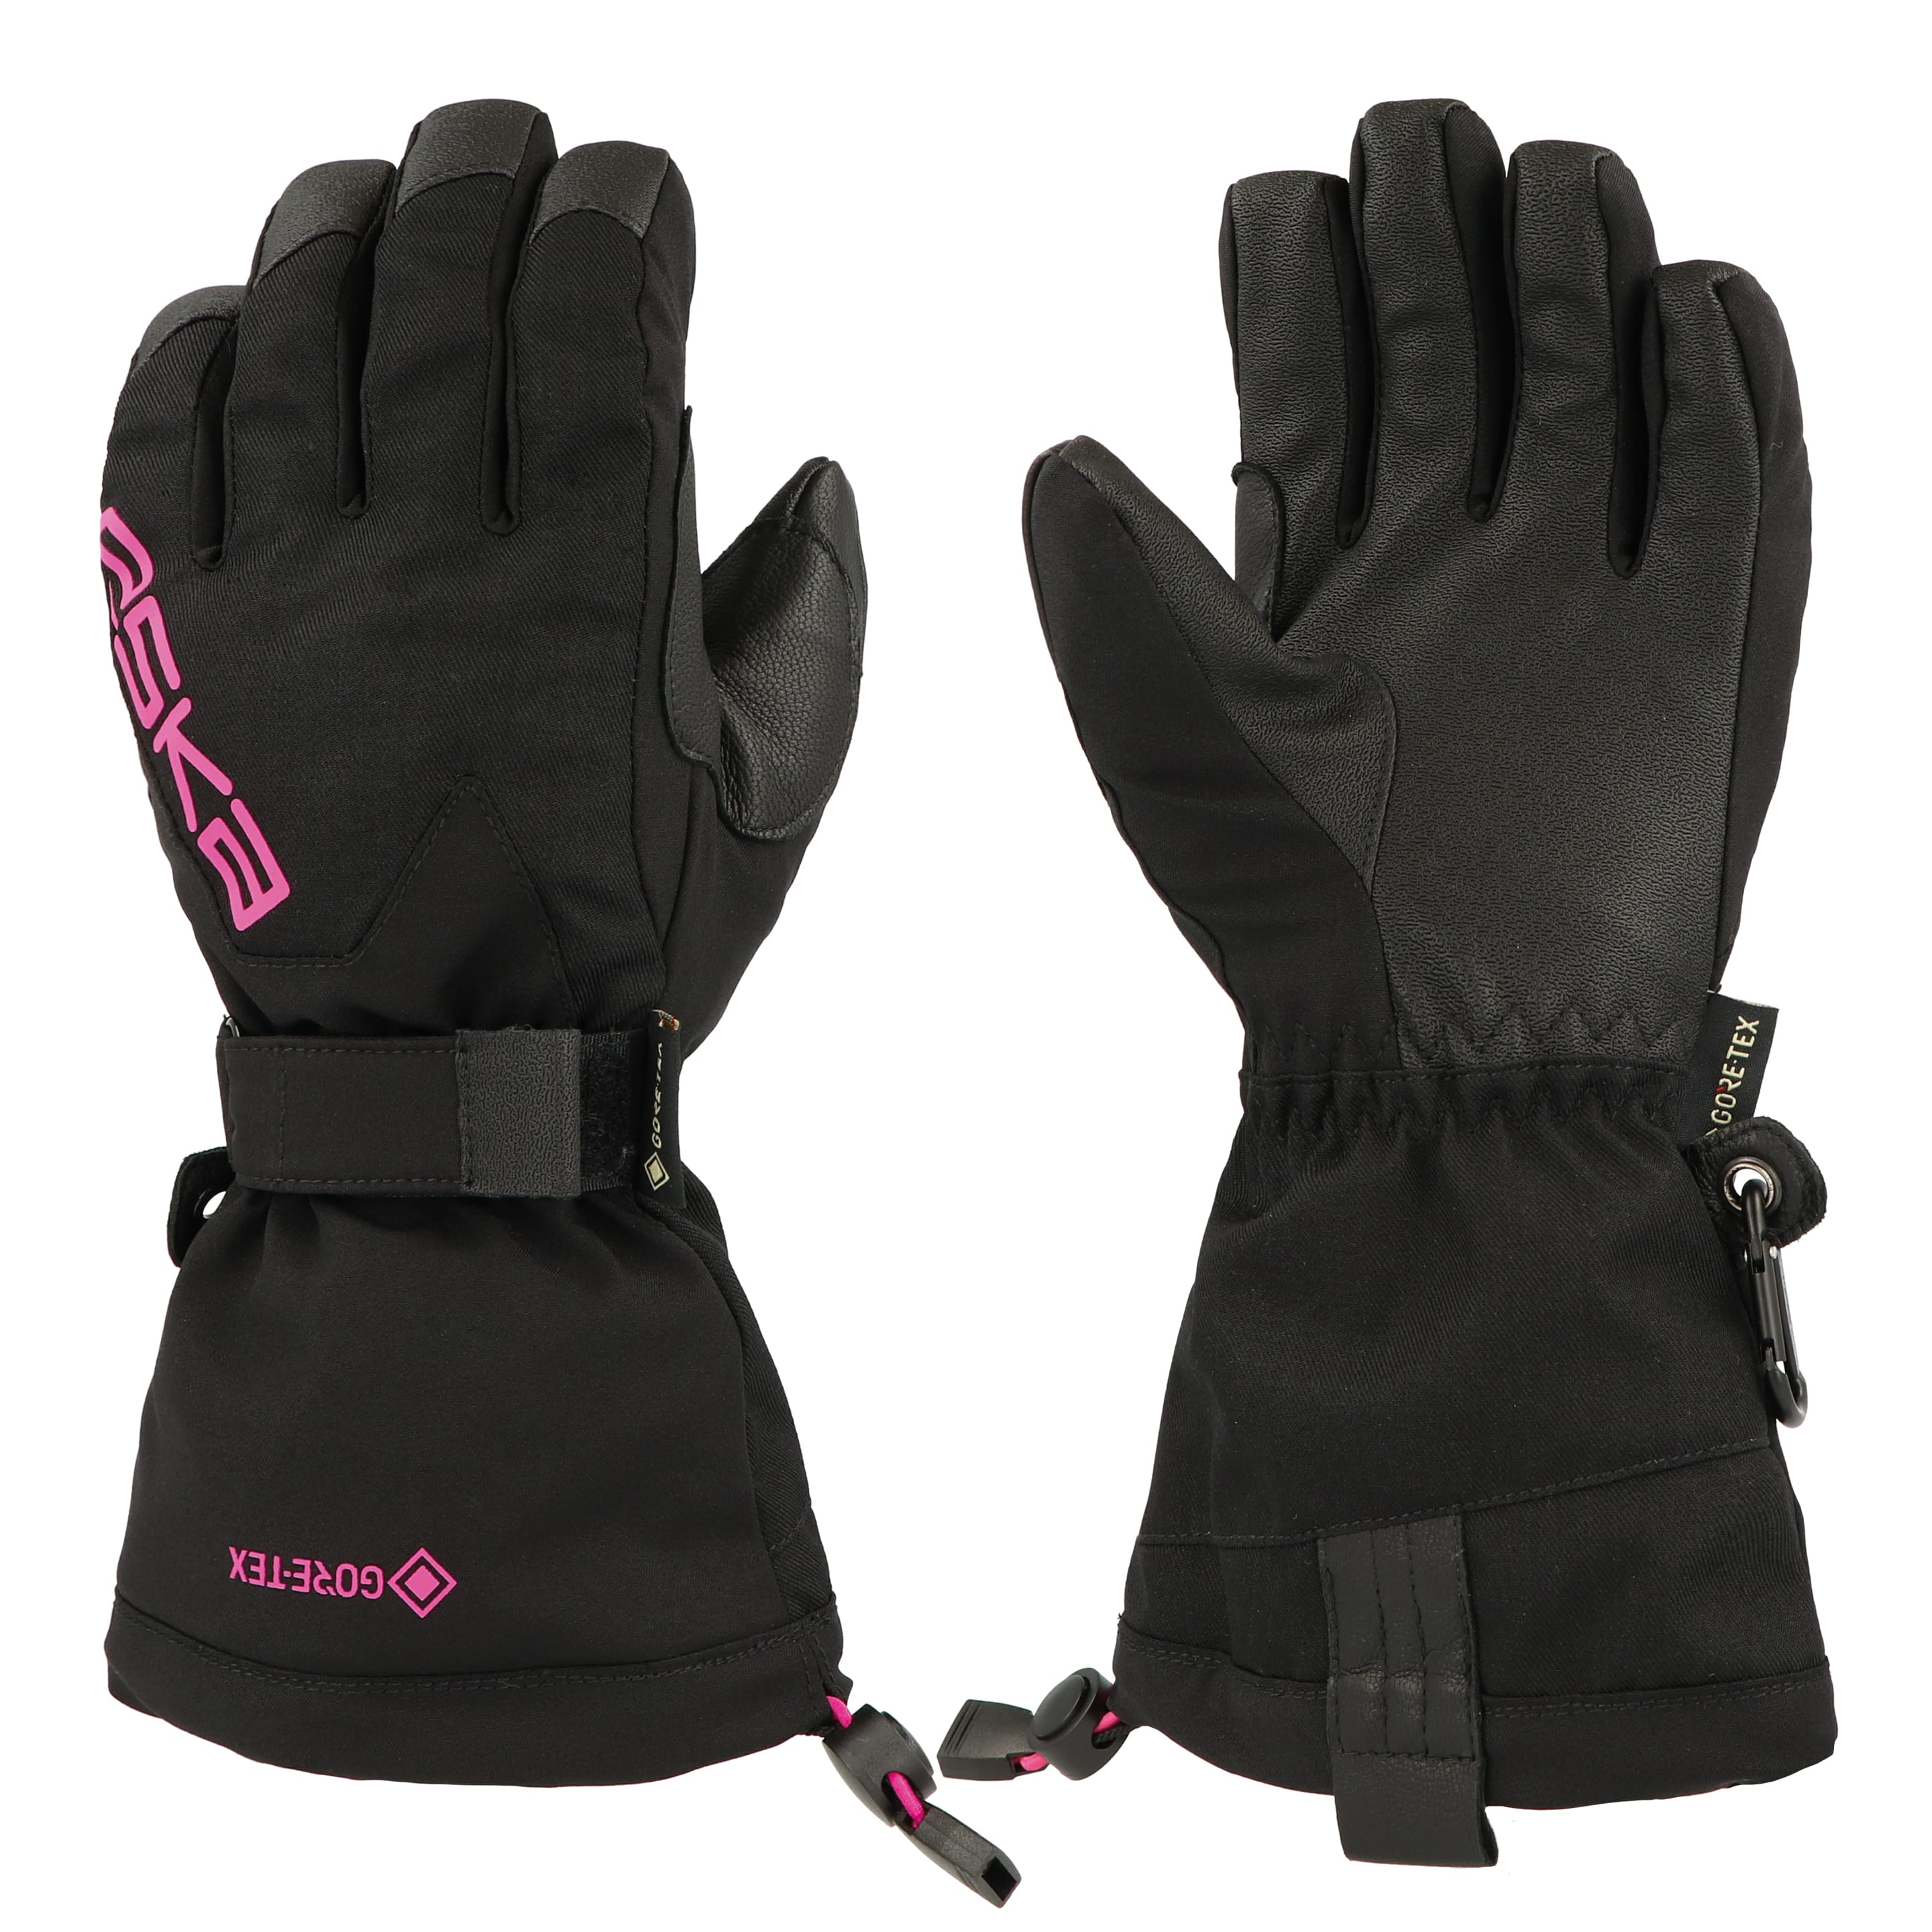 Winter Sports Gloves for Skiing and Snowboarding | ESKA